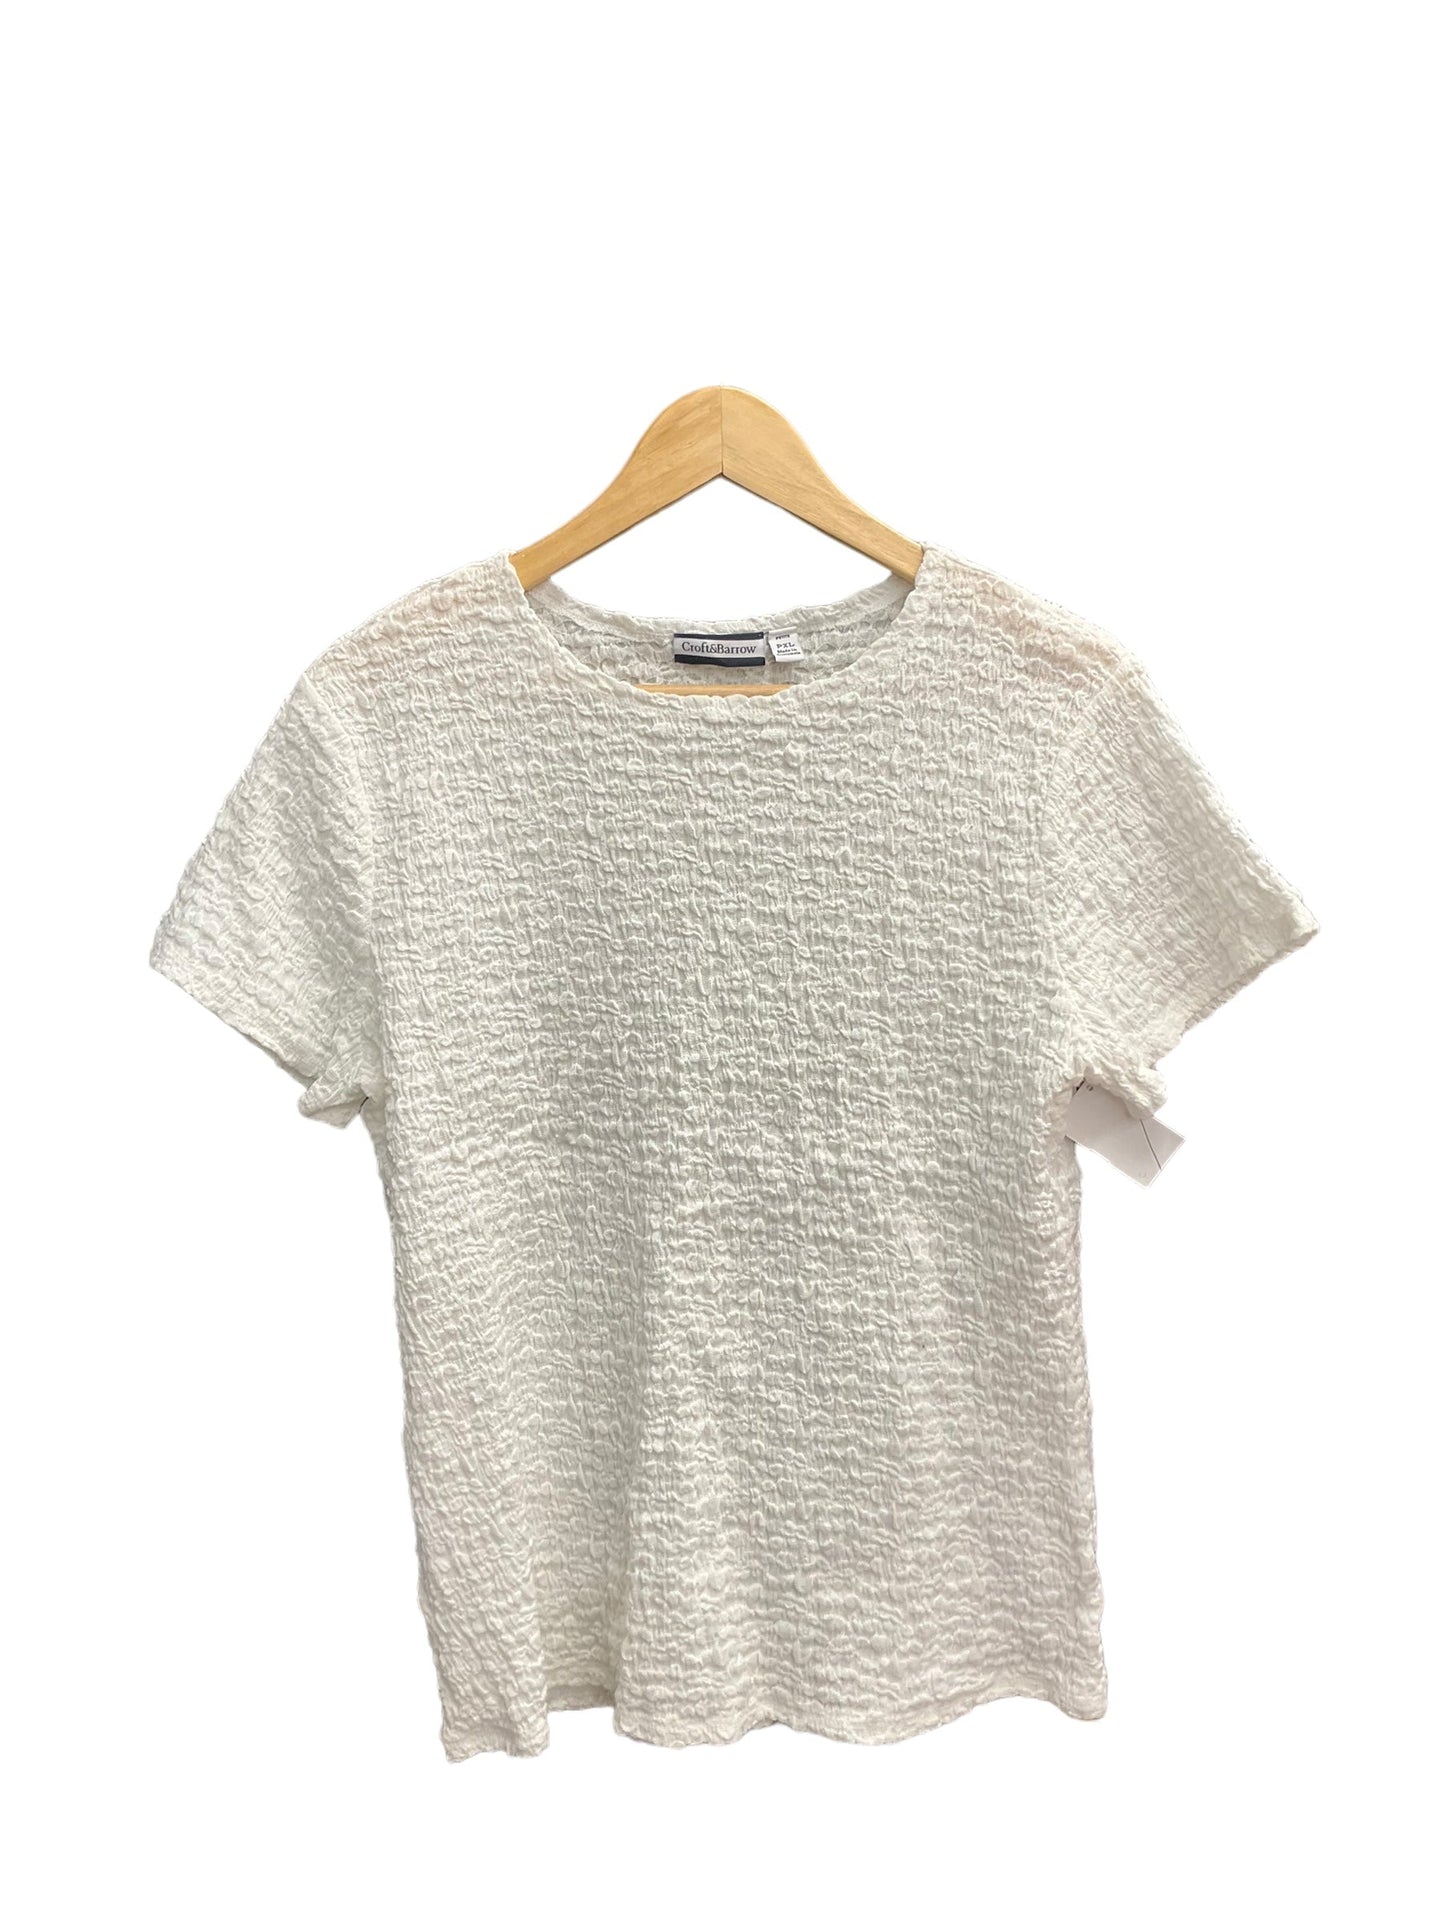 White Top Short Sleeve Croft And Barrow, Size Xl